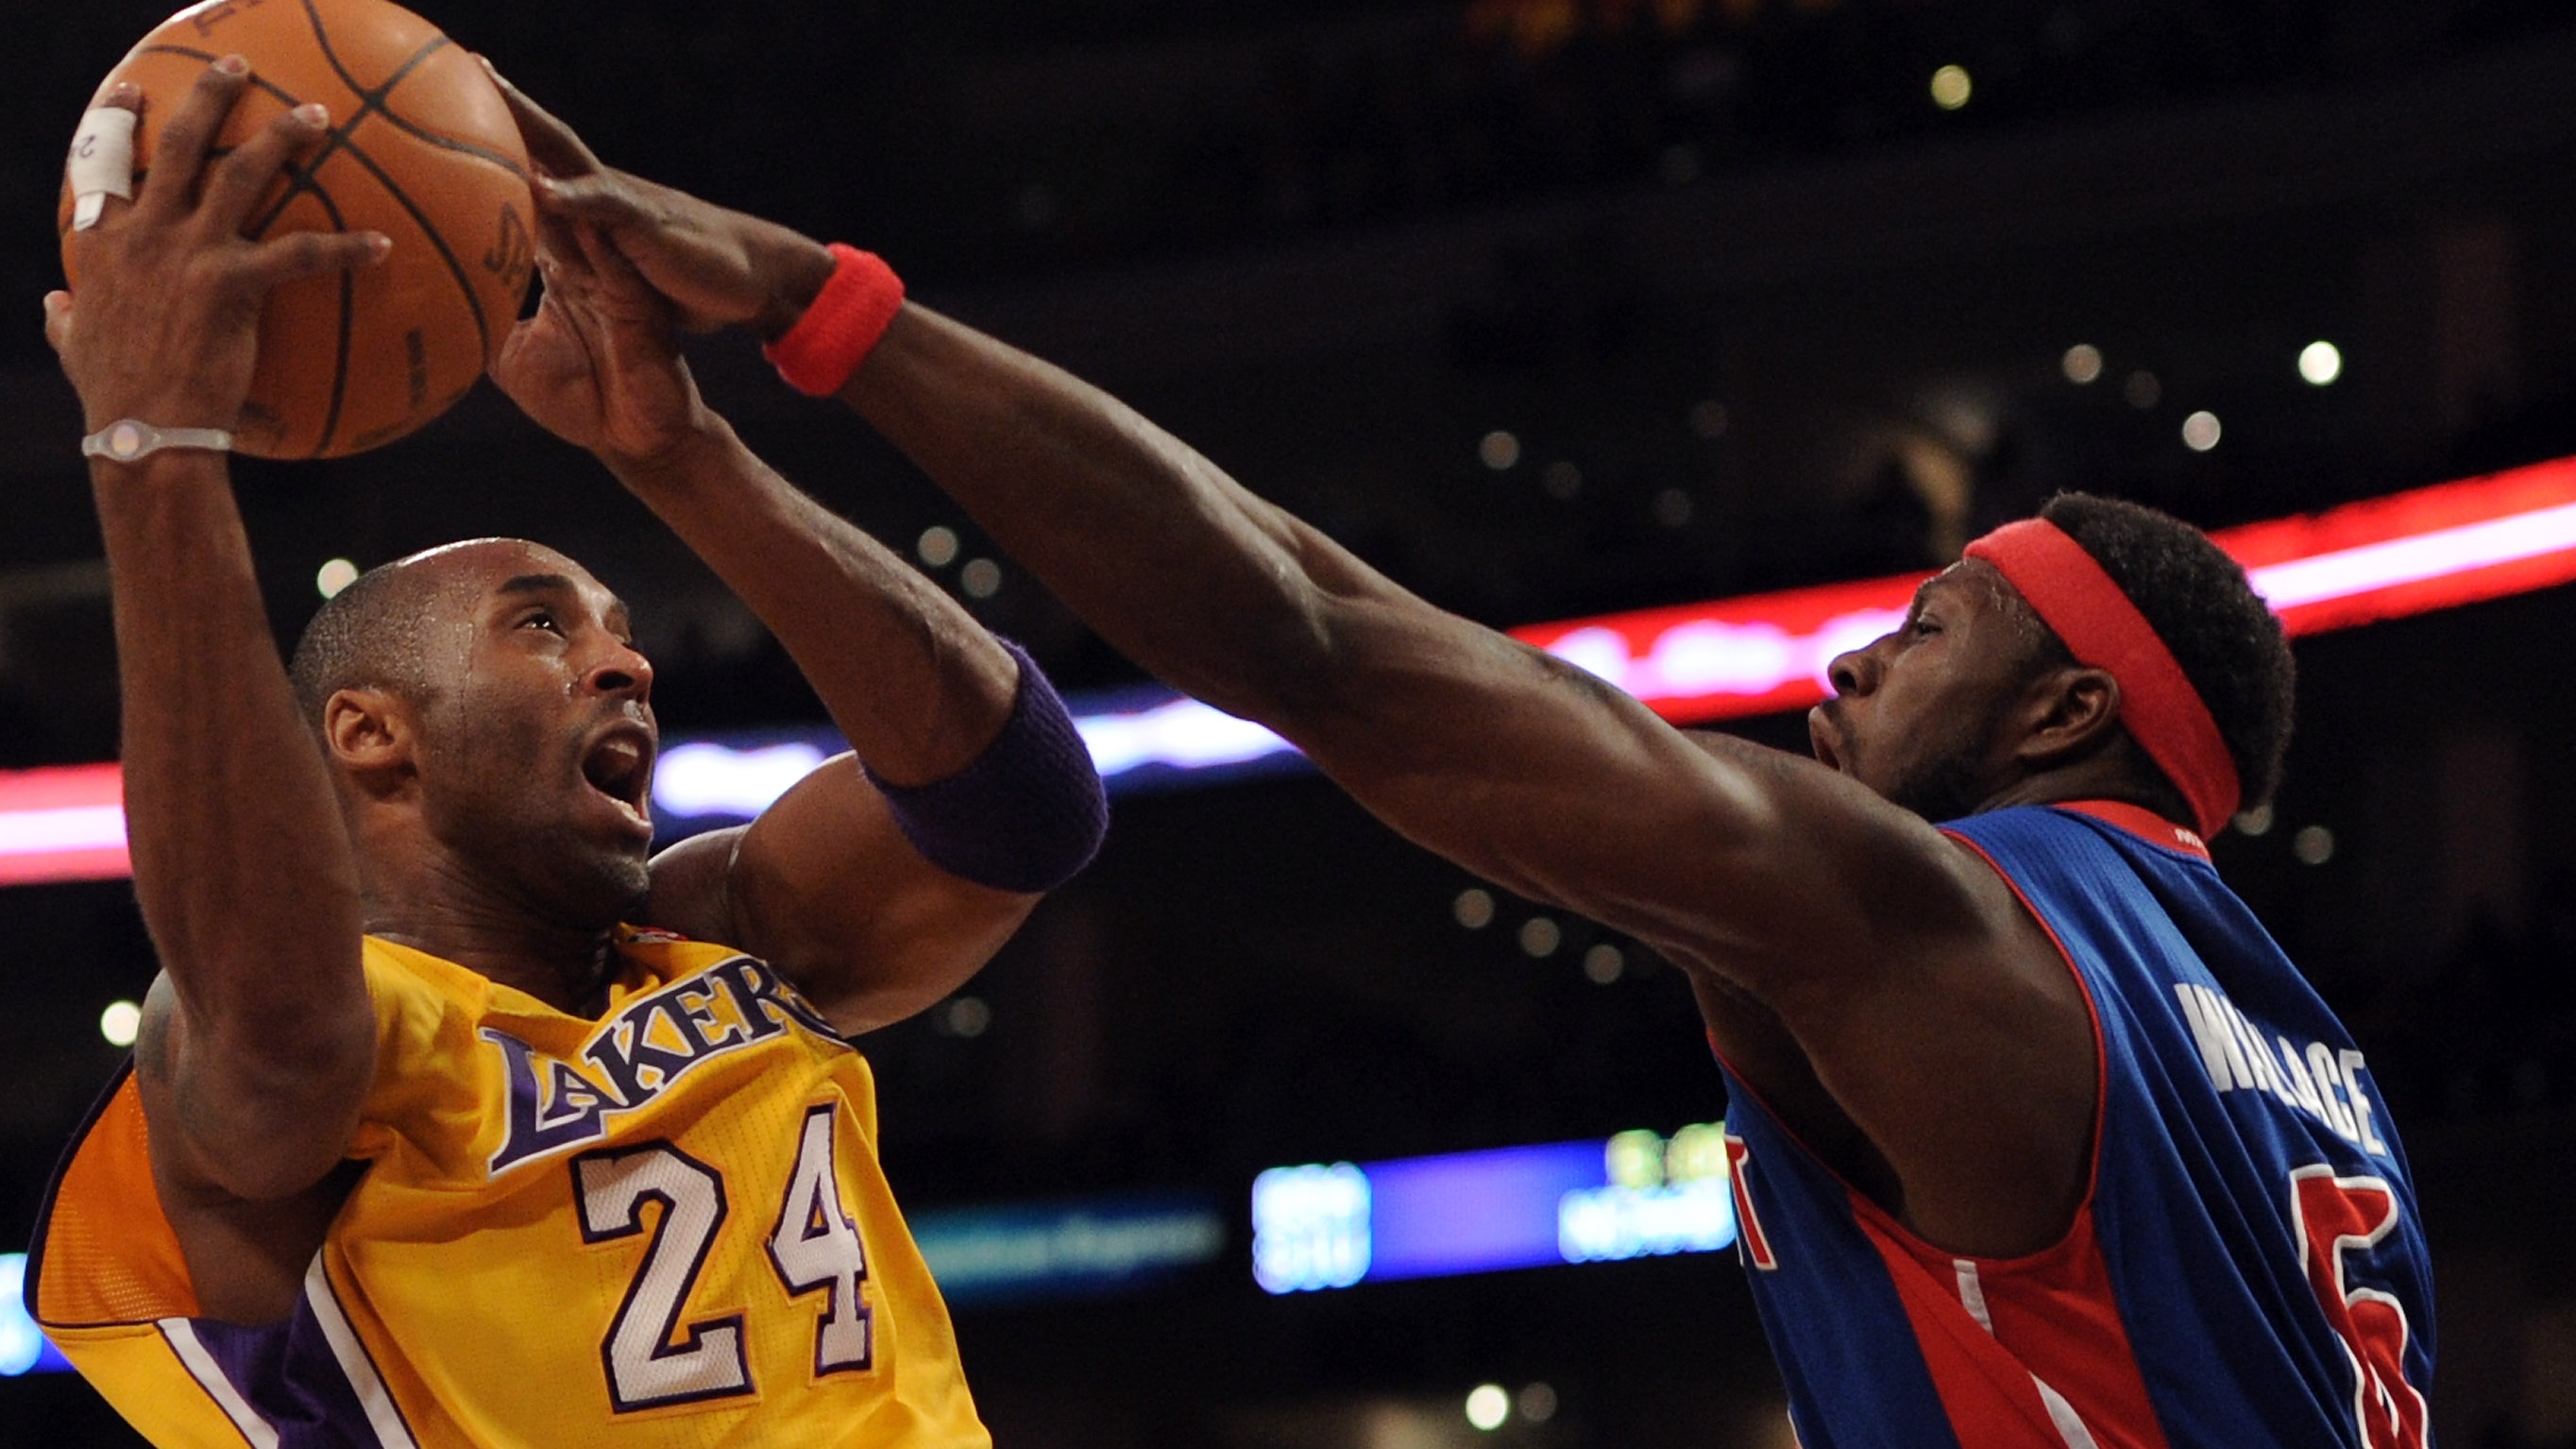 PHILLY'S WILT AND KOBE AT THE TOP: CHECK OUT BRYANT'S 81-POINTER